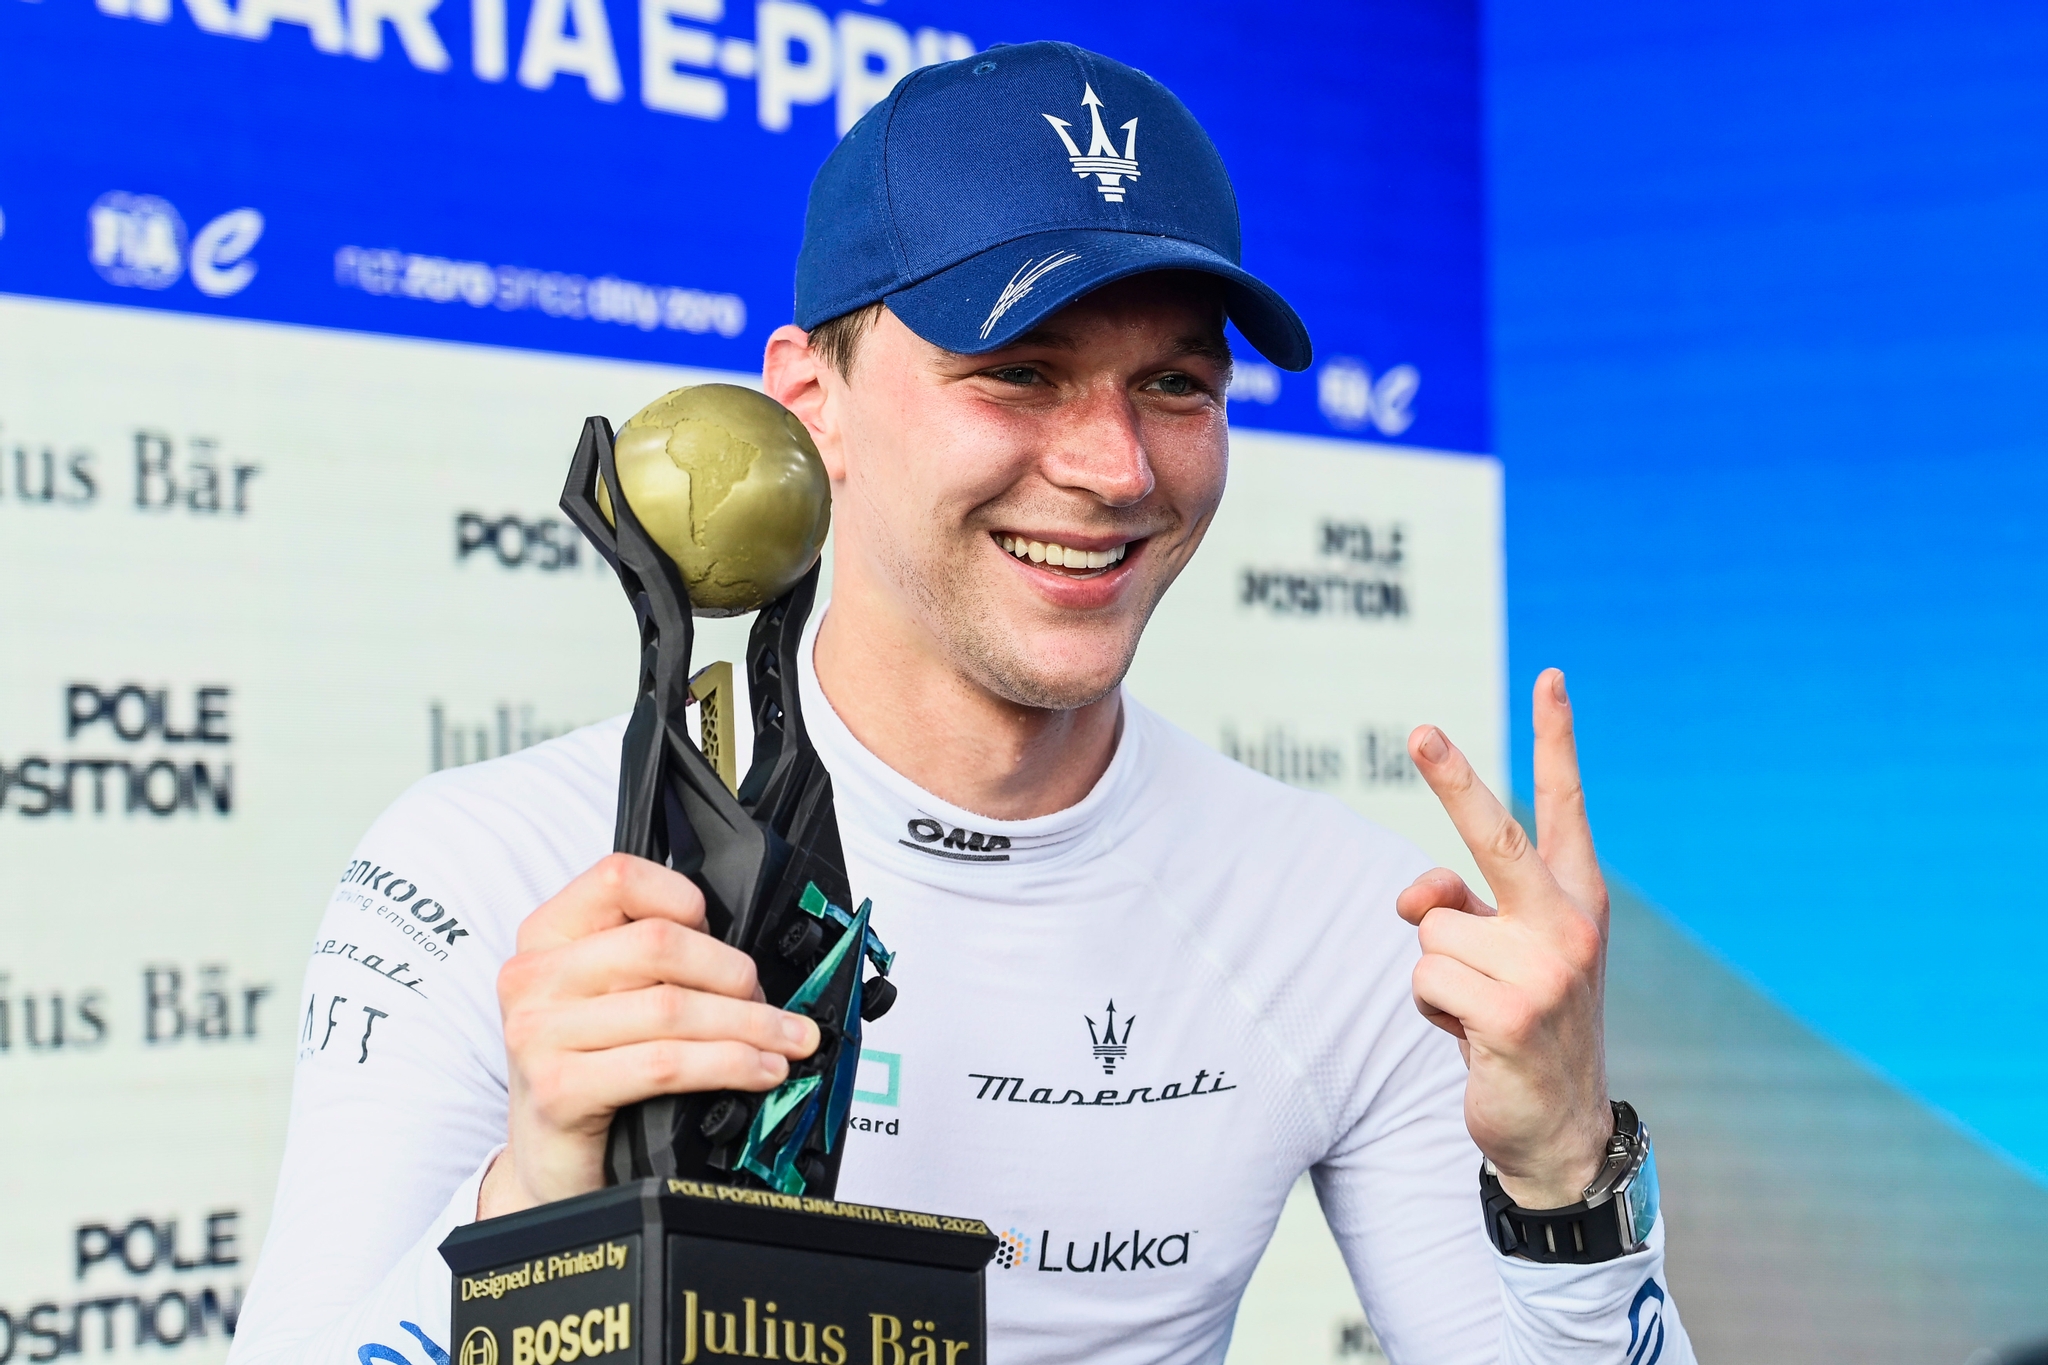 Maximilian Gunther, Maserati Msg Racing, With The Pole Position Award